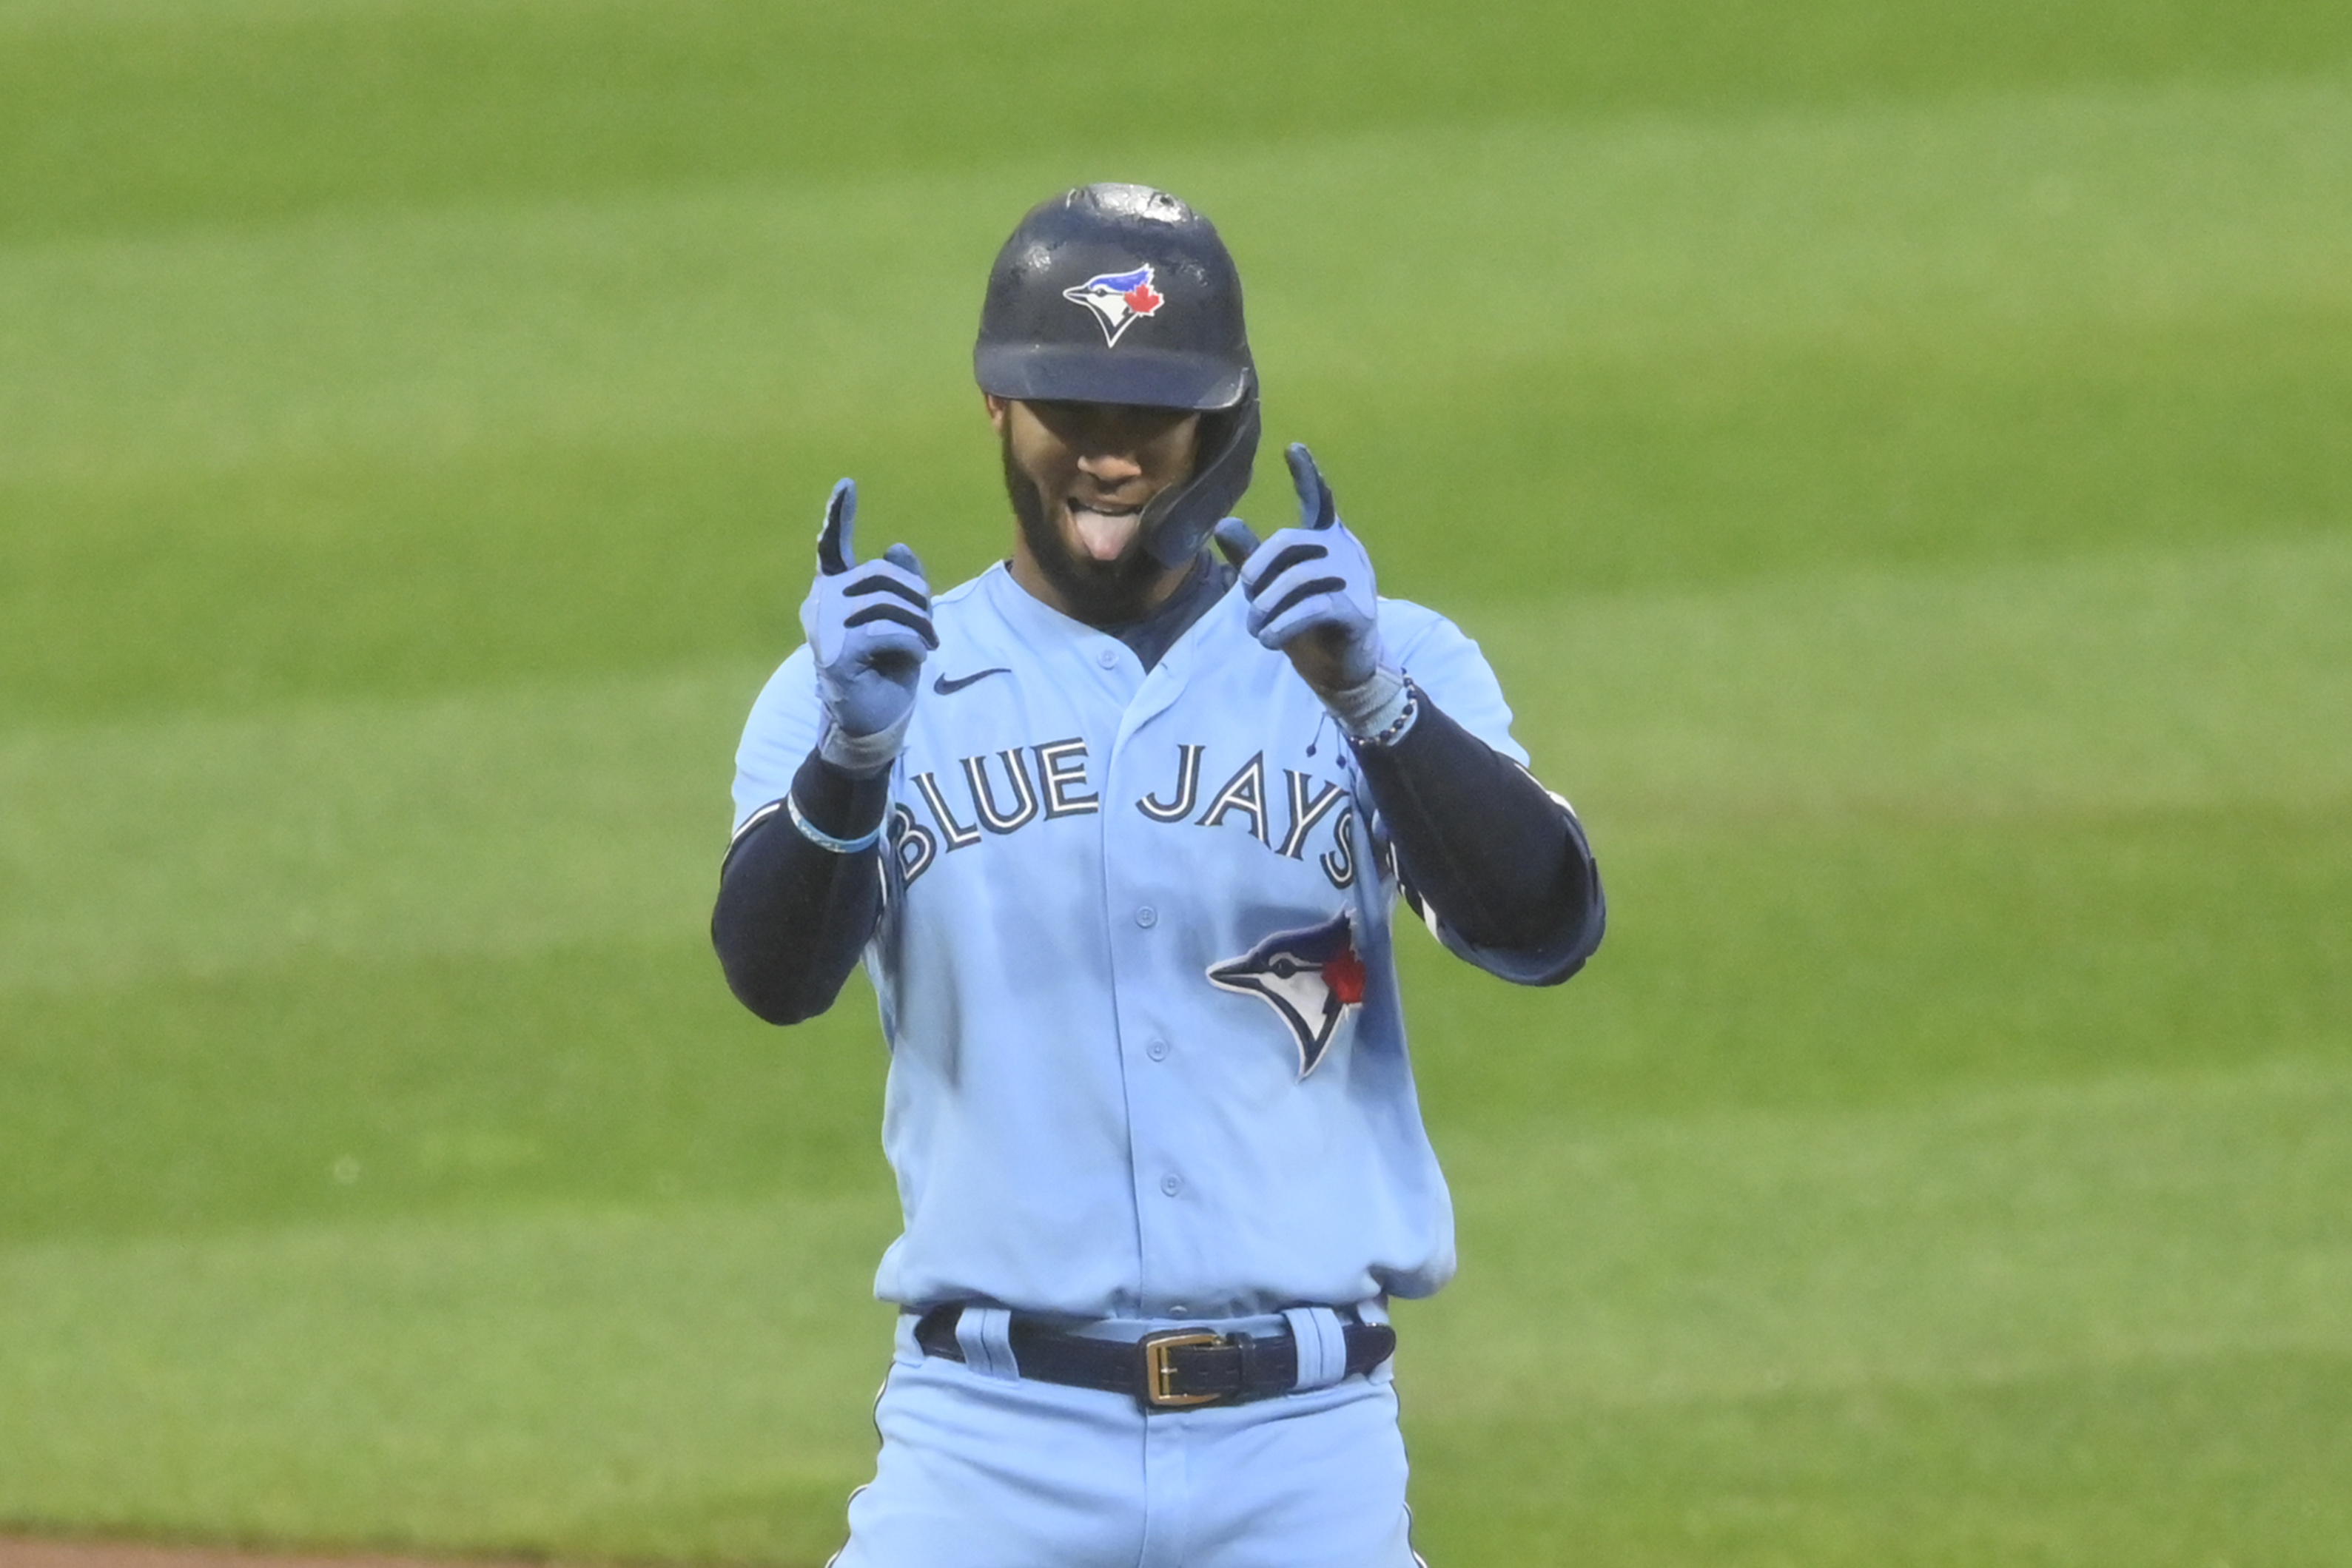 Blue Jays pound Indians, 11-2, in game shortened by bad weather